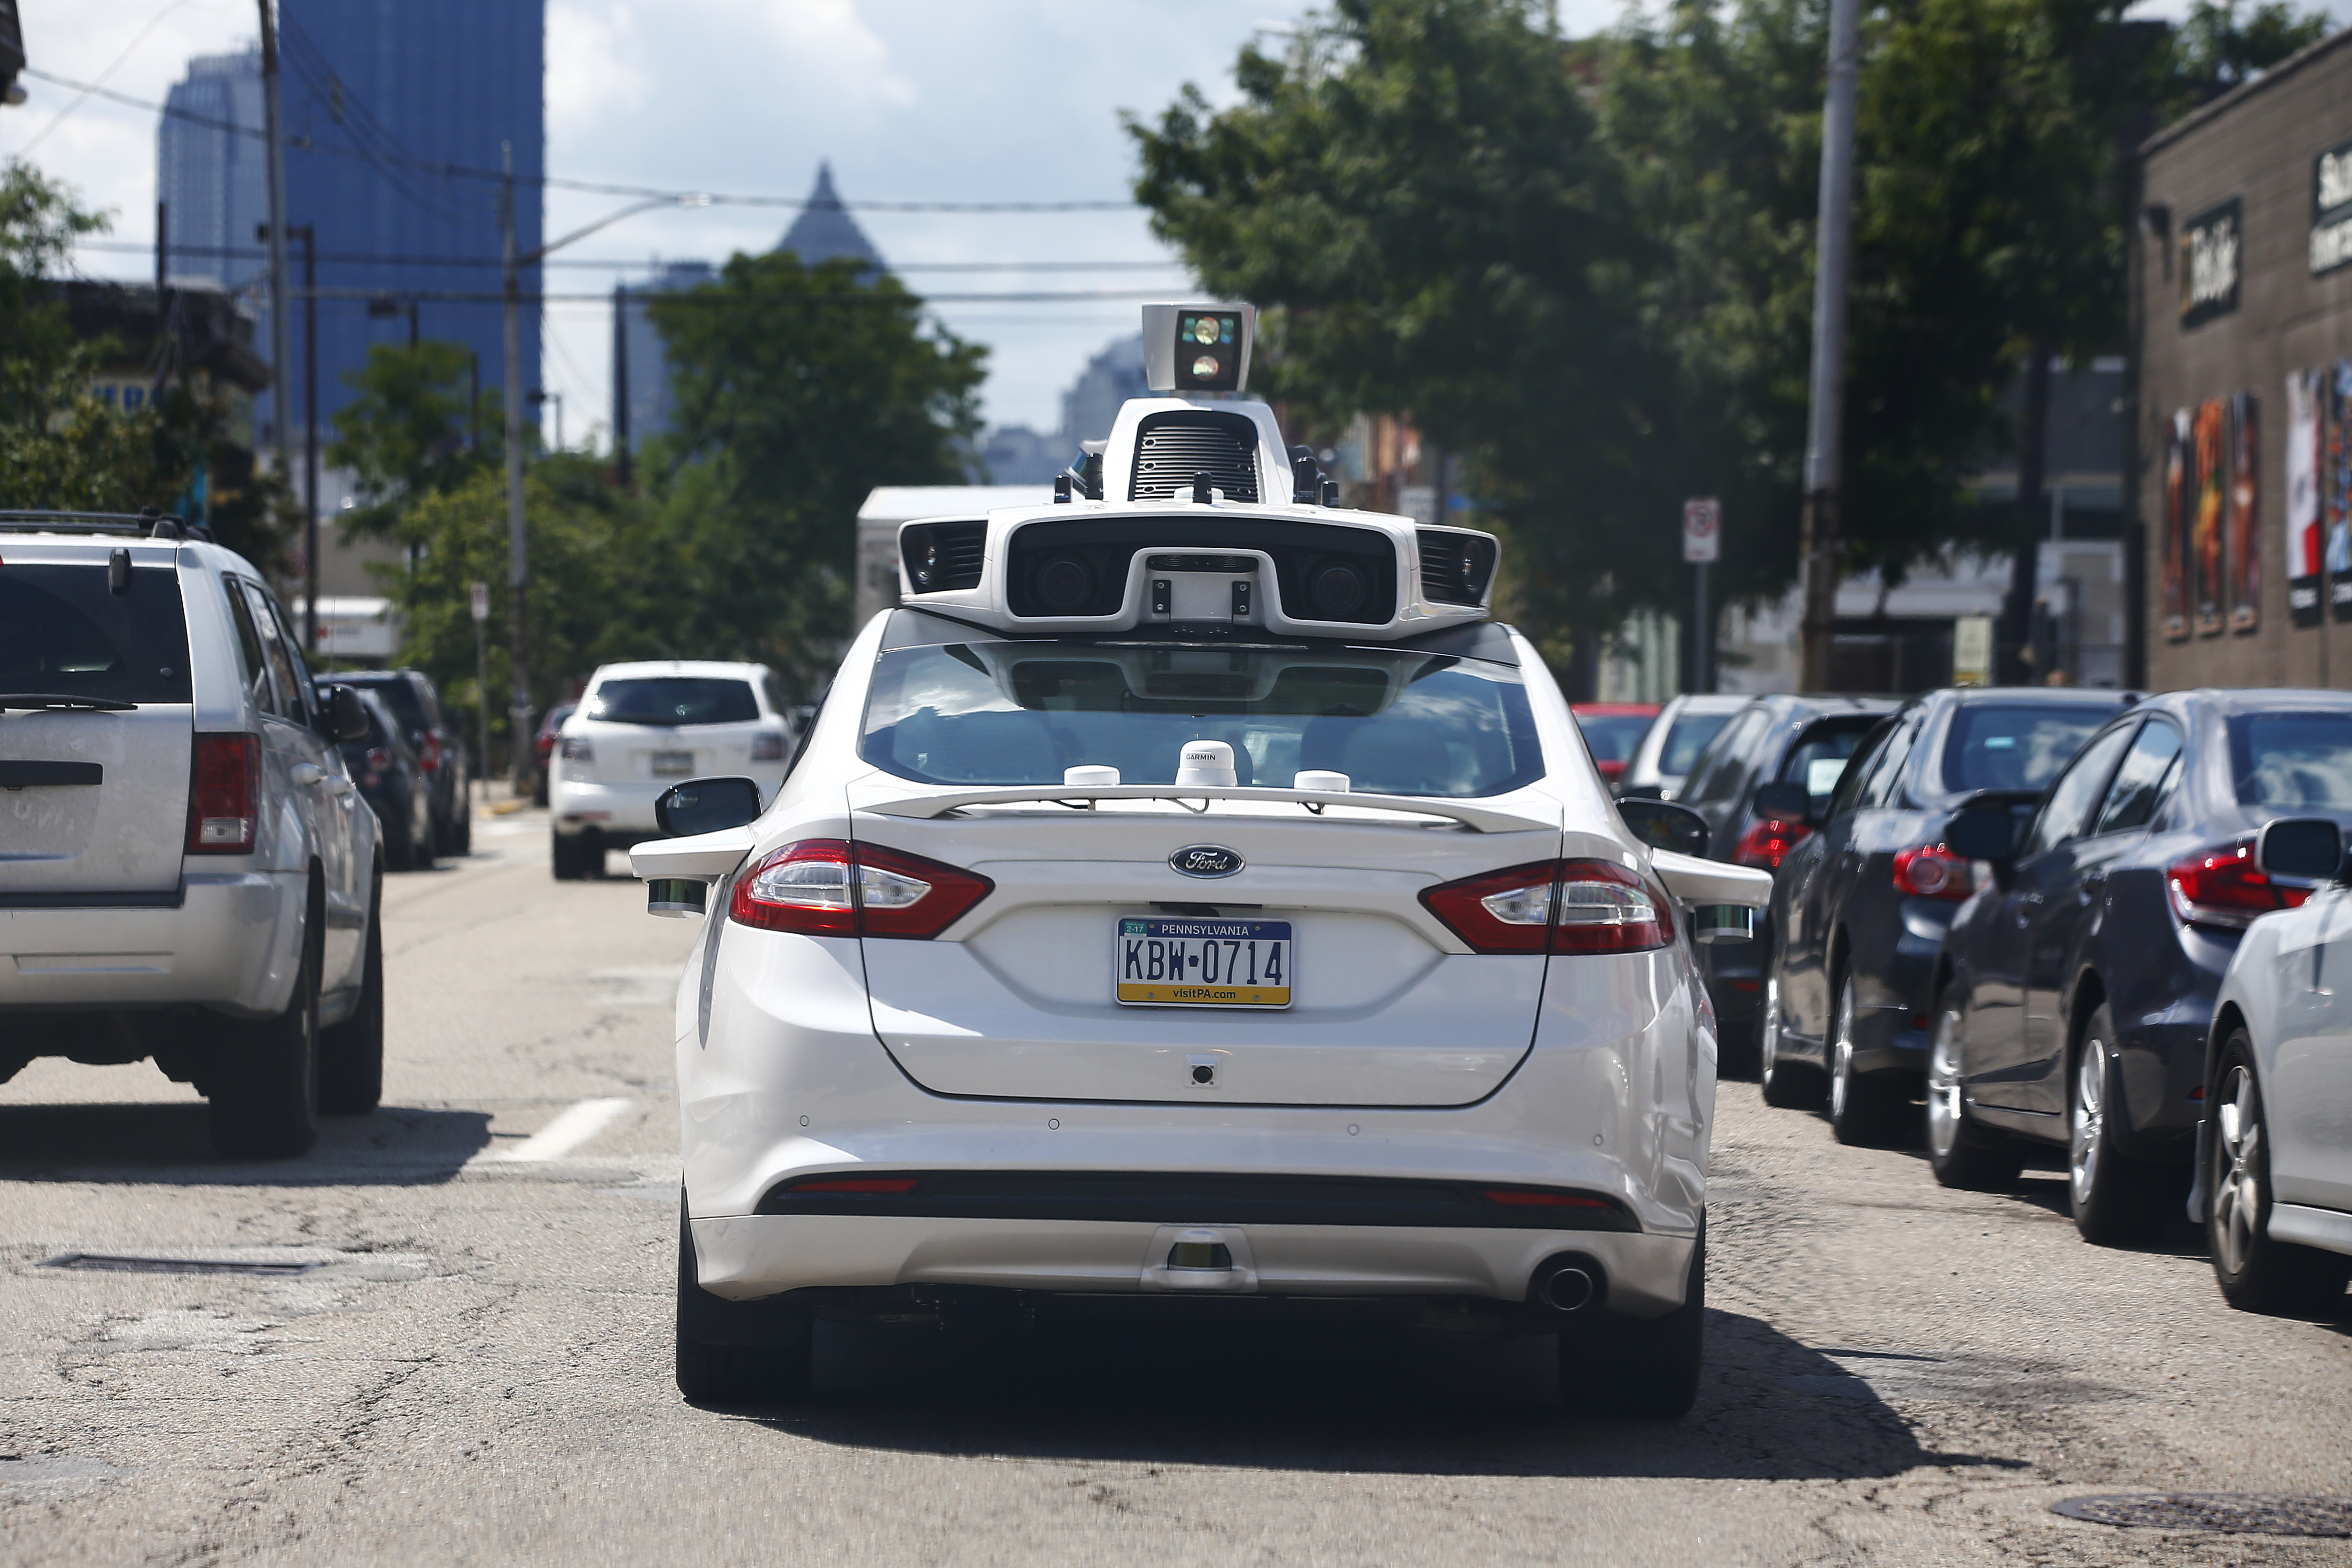 One of Uber's self-driving cars being tested in Pittsburgh, August 2016 (AP Photo/Jared Wickerham)